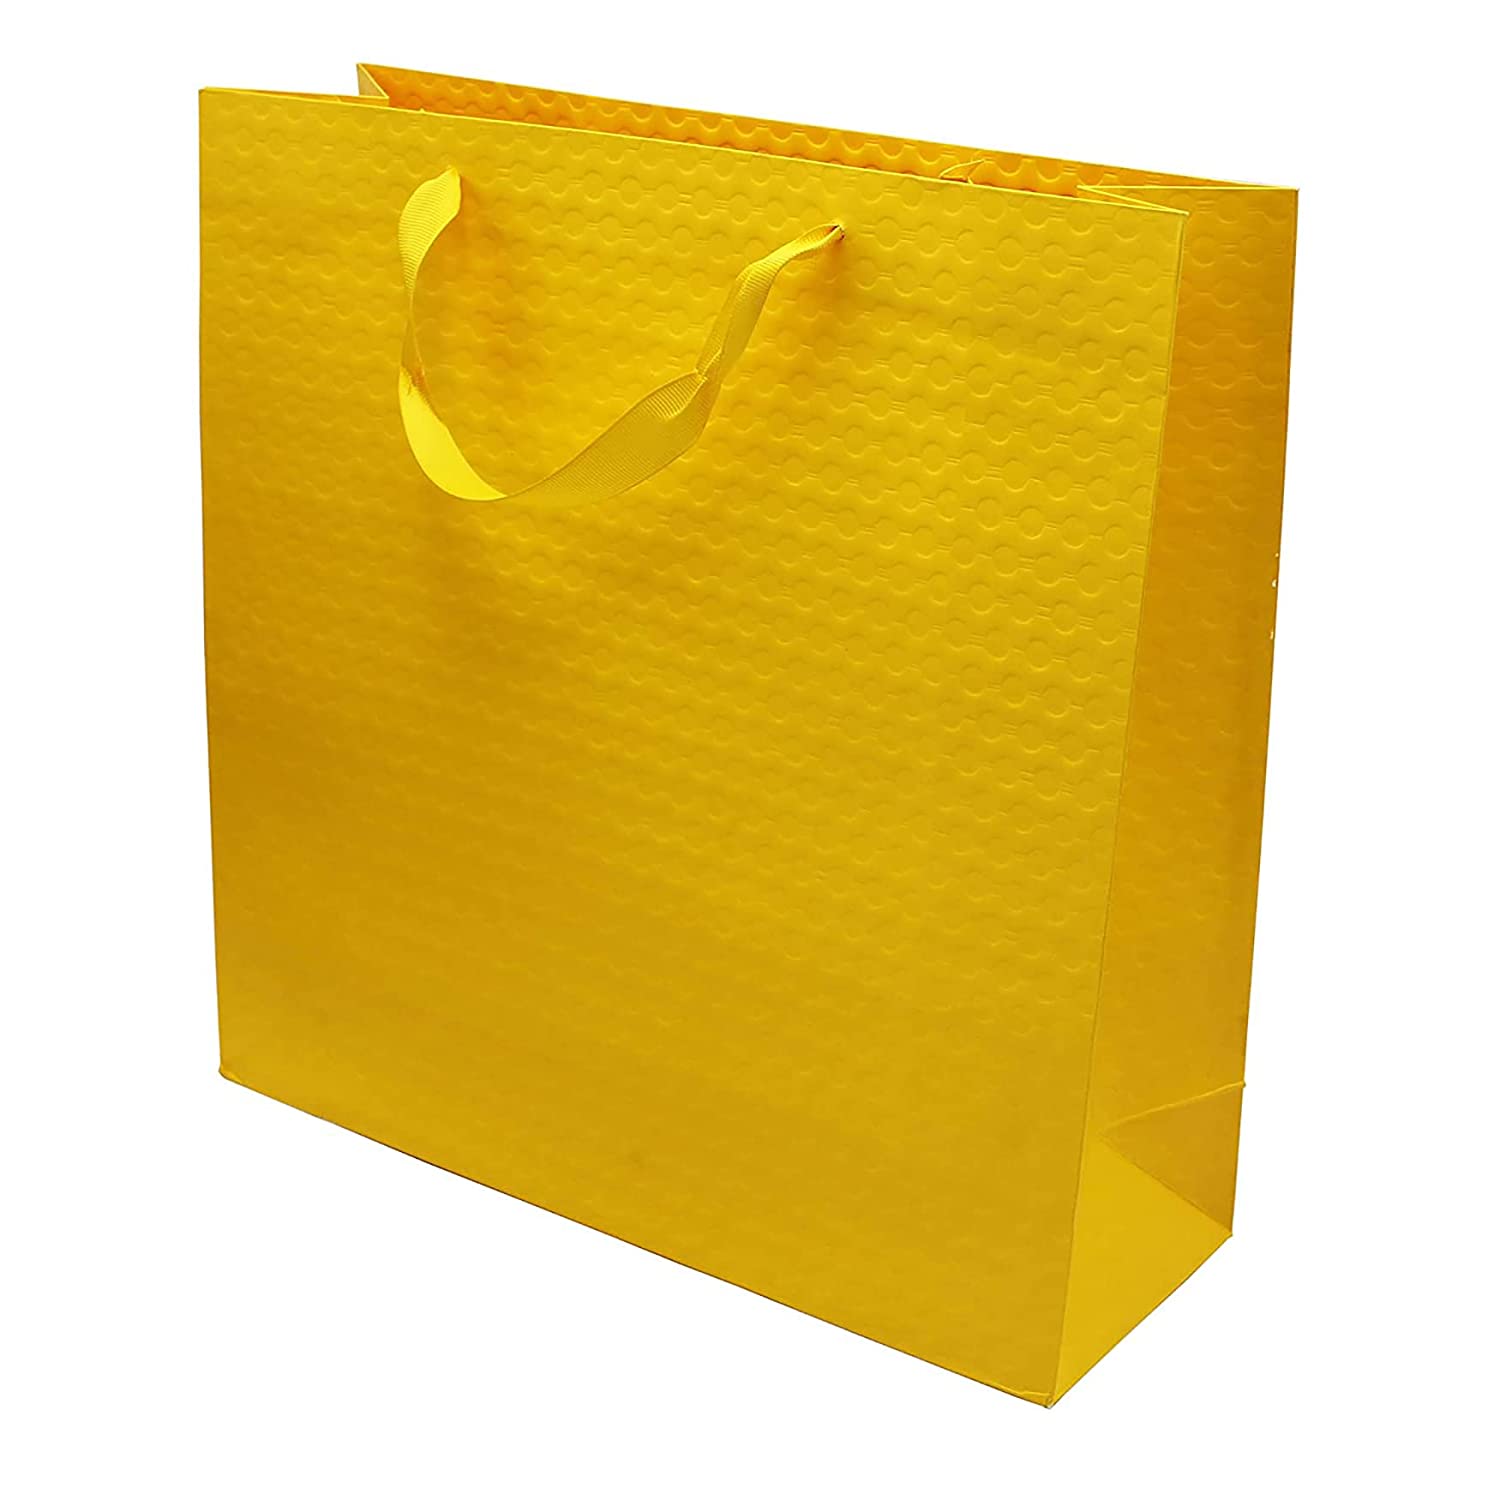 iLife Gift Bags -34*12*34CM 12 Pcs Paper Bags with Handles Bulk, Shopping Bags Retail Bags Paper Gift Bags, Shopping, Parties, Wedding, Baby Shower, Birthdays, Father's Day, Holidays and More Yellow